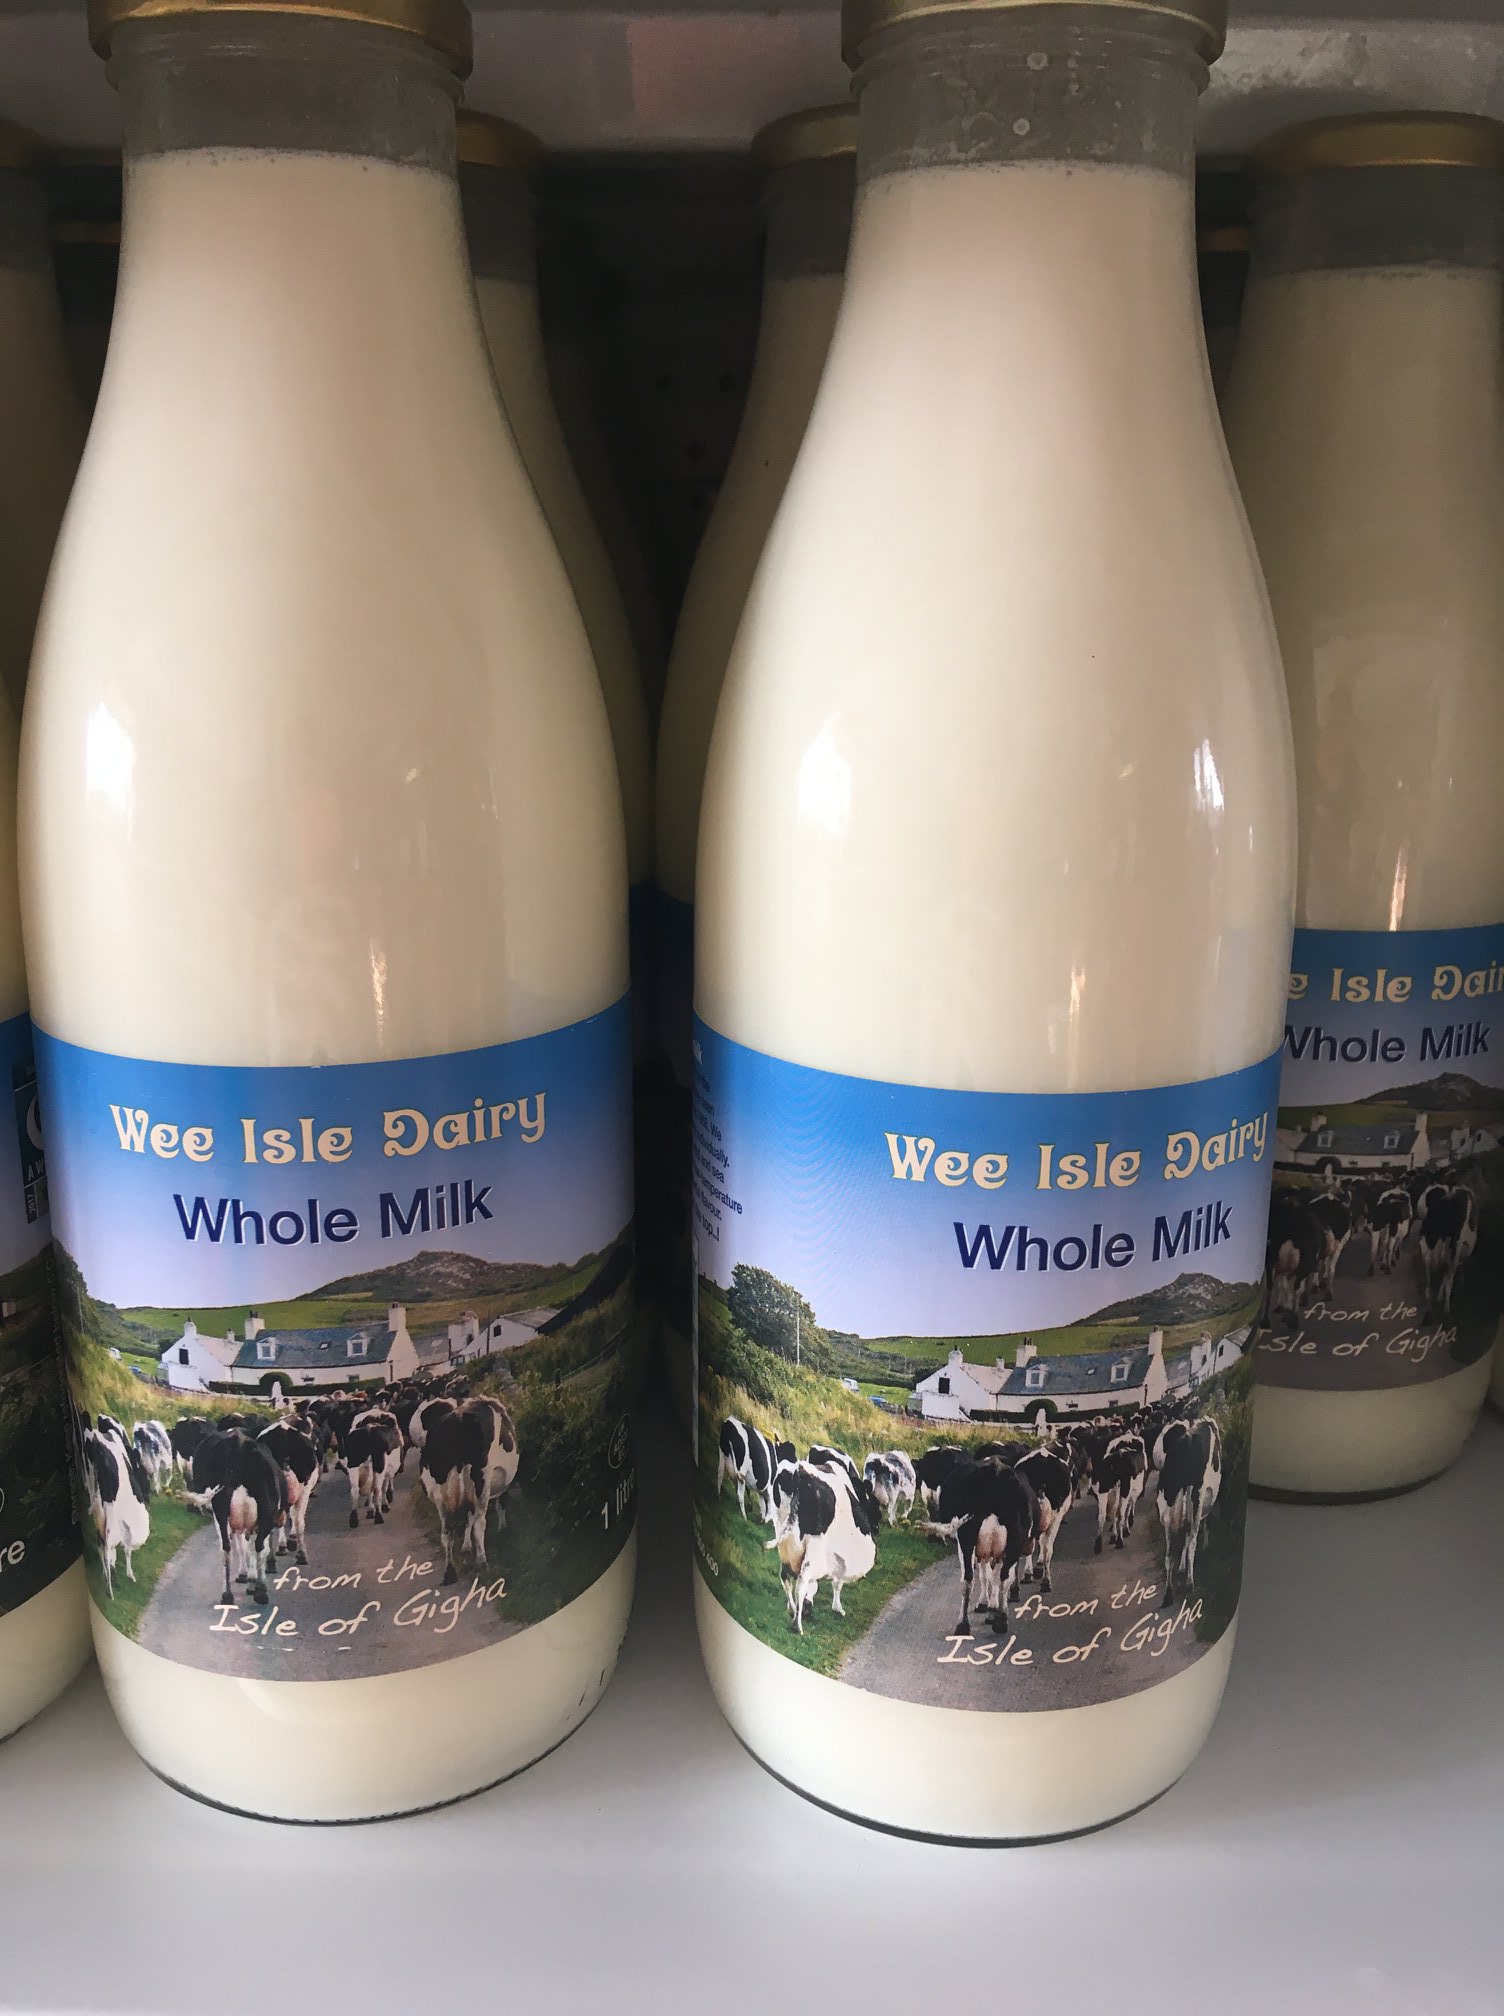 The Lido Community Shop on Twitter: "We gotta lotta bottle!!! Gigha has  come to the rescue with milk. £1.99 per litre from the Wee Isle Dairy.  Glass bottles to be rinsed and